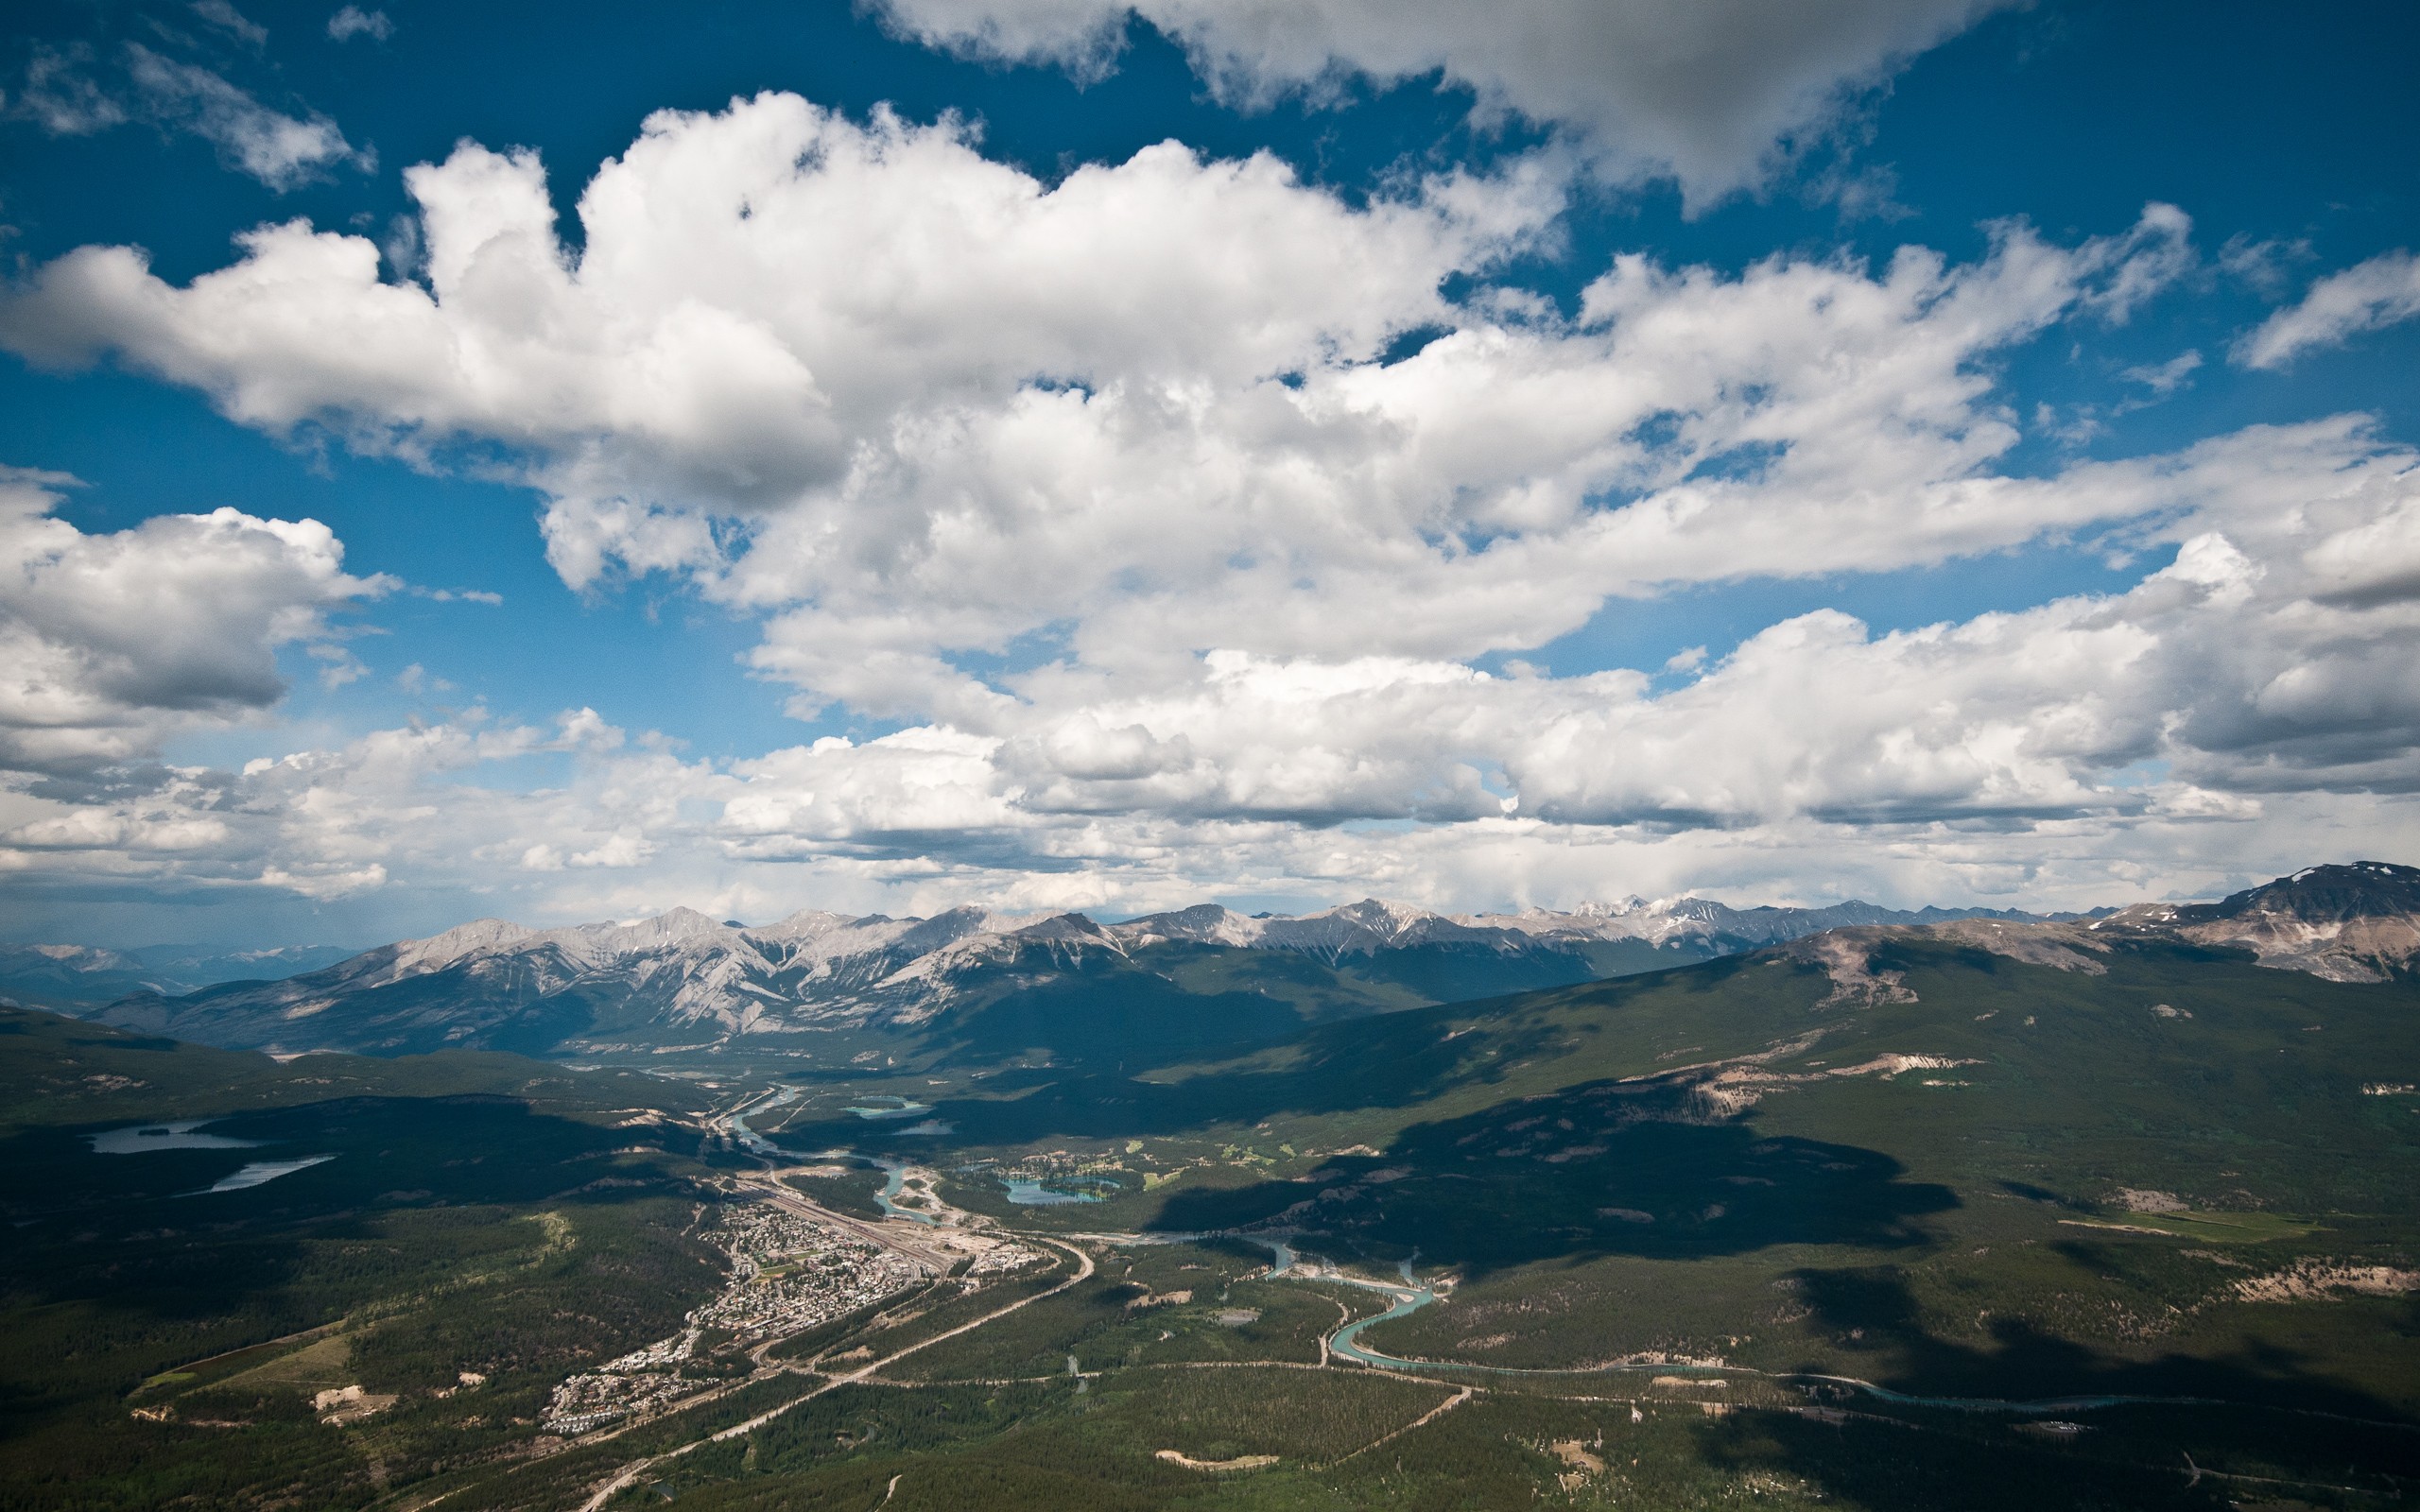 General 2560x1600 landscape mountains town aerial view river Jasper National Park Canada